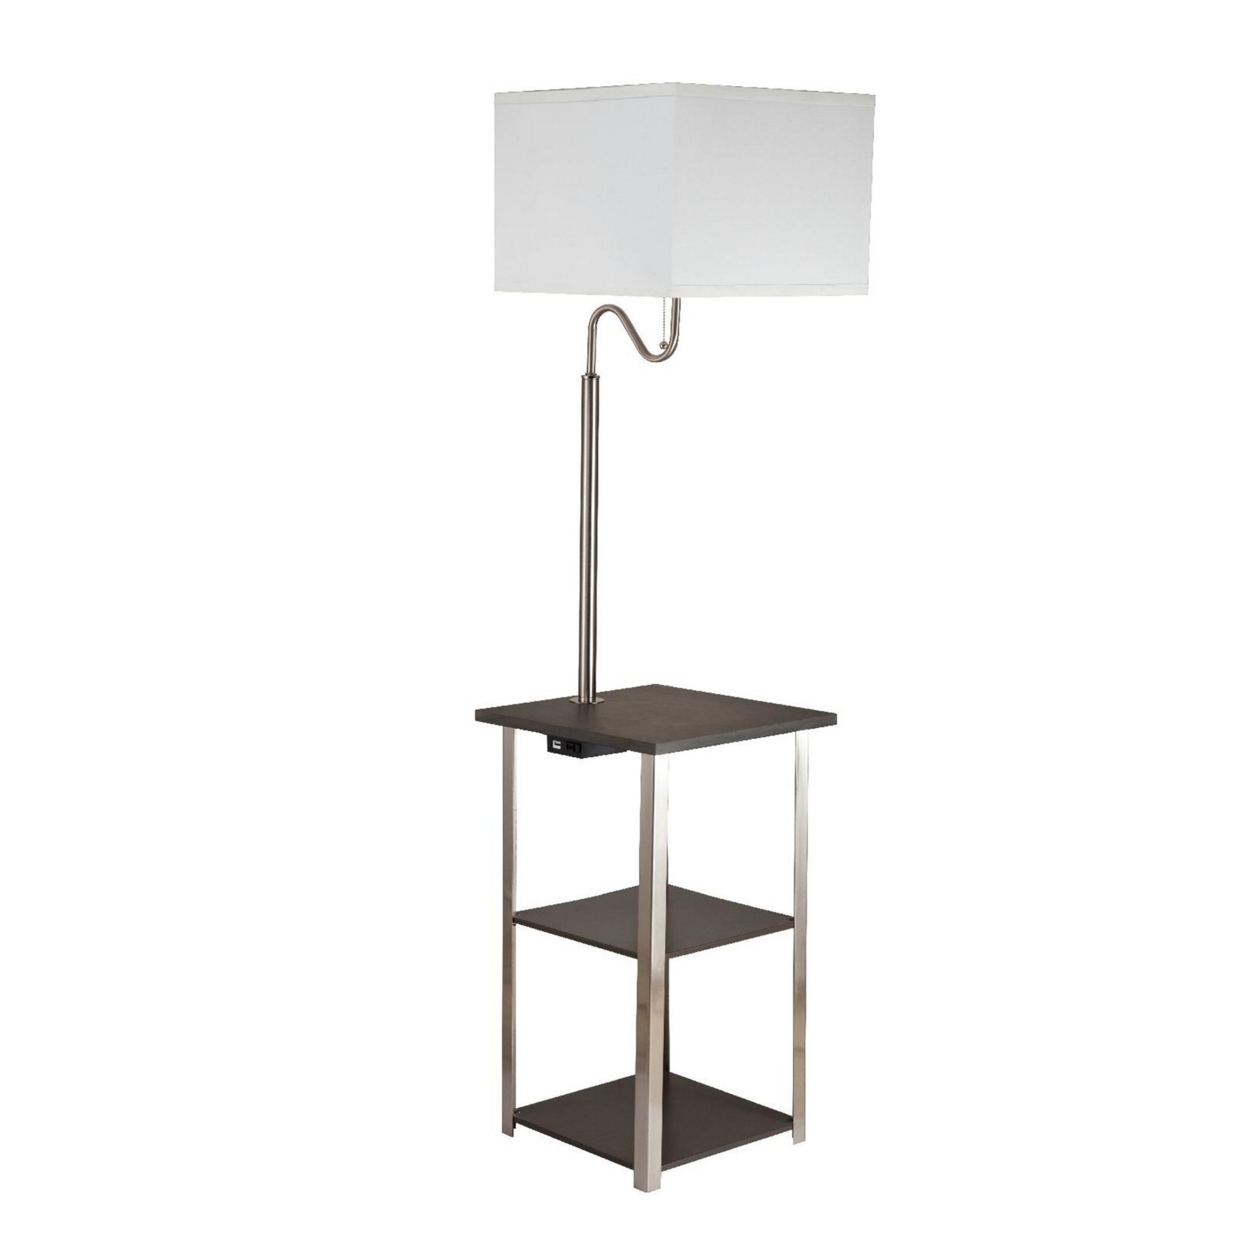 2 Shelf Wooden Side Table With Attached Floor Lamp, Silver And Brown- Saltoro Sherpi